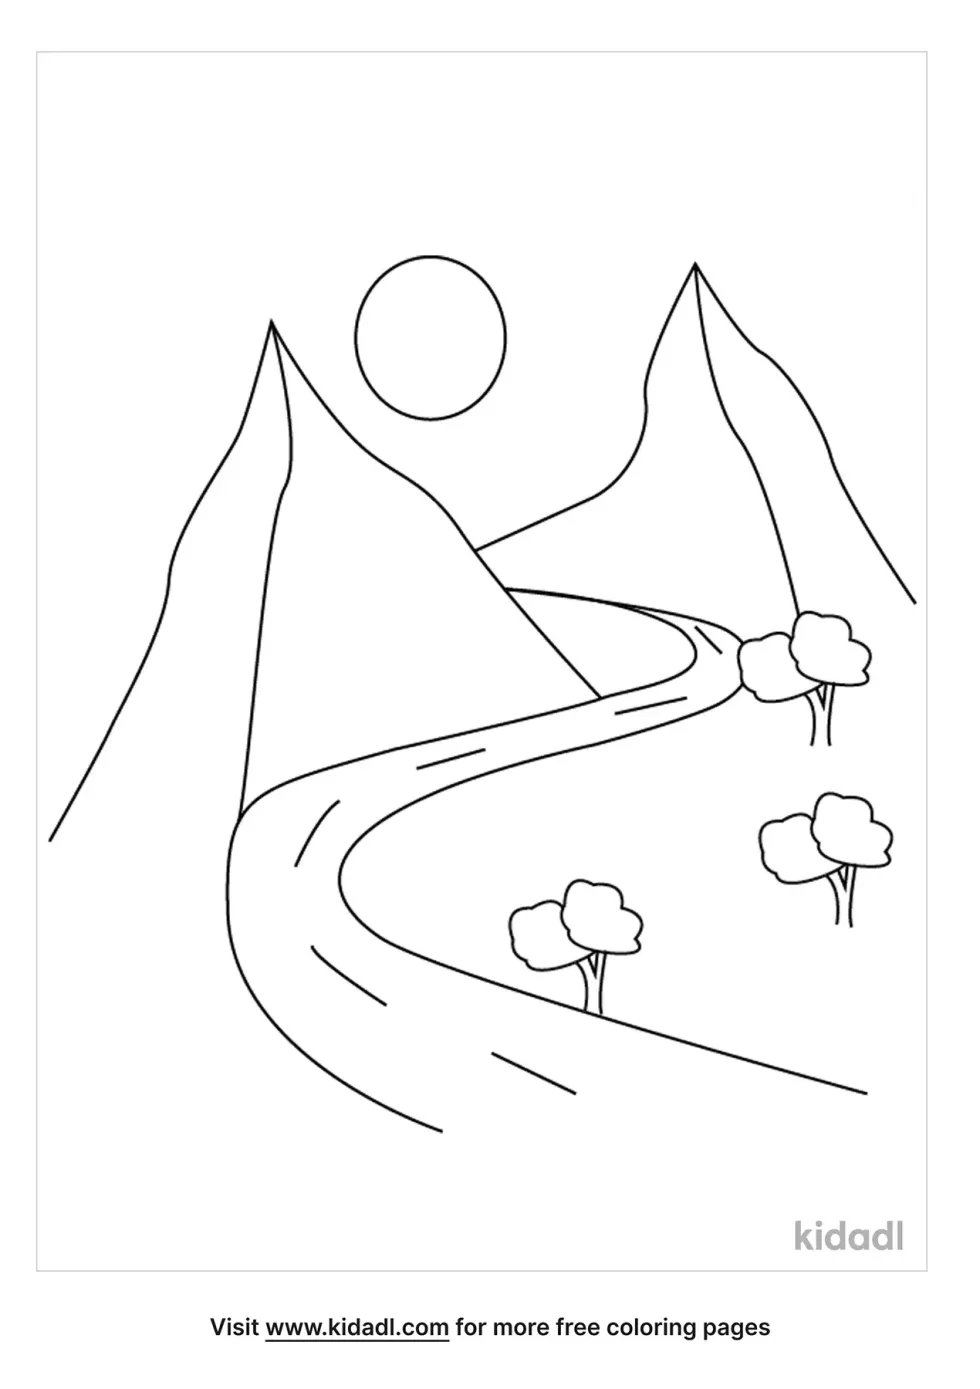 Curved Road Coloring Page